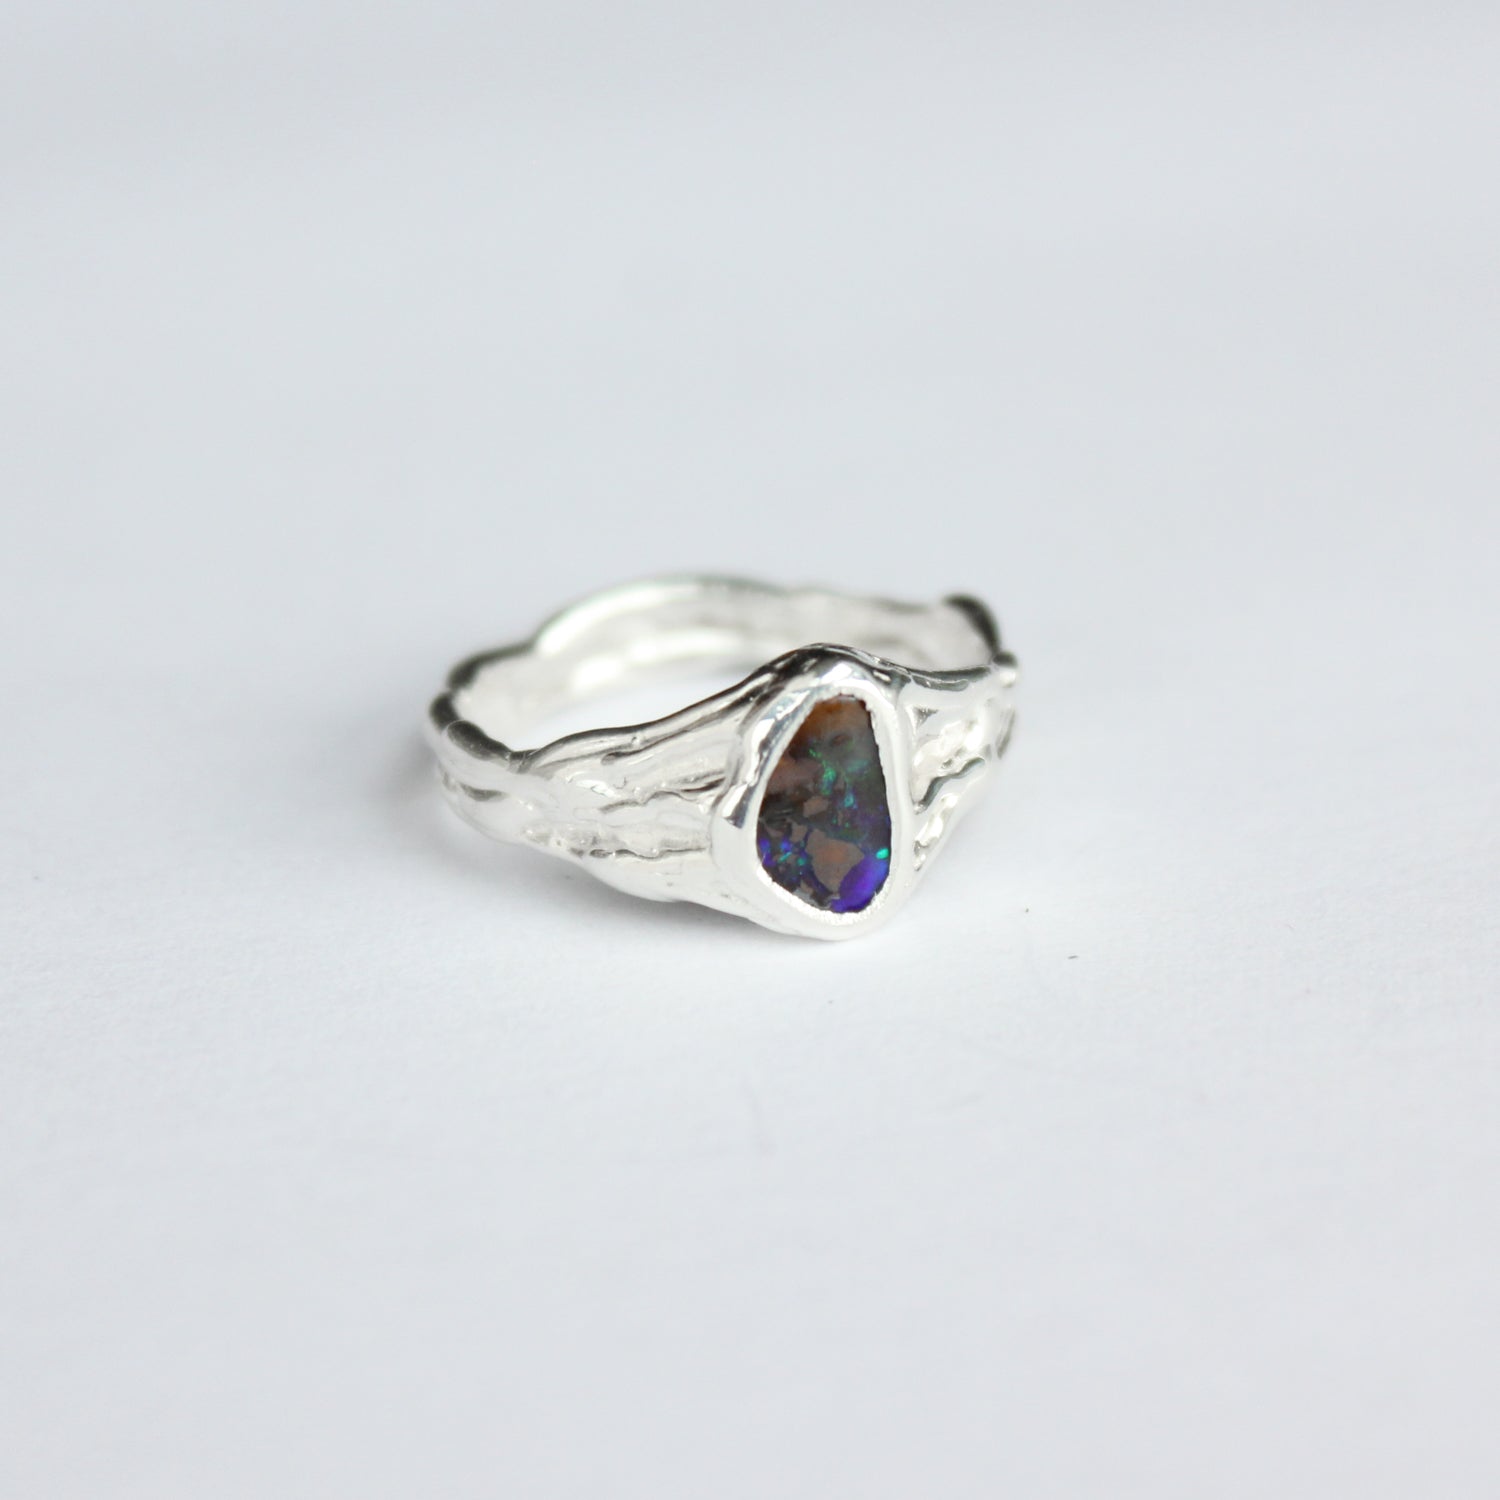 Squiggly Opal Ring - Size 6.5